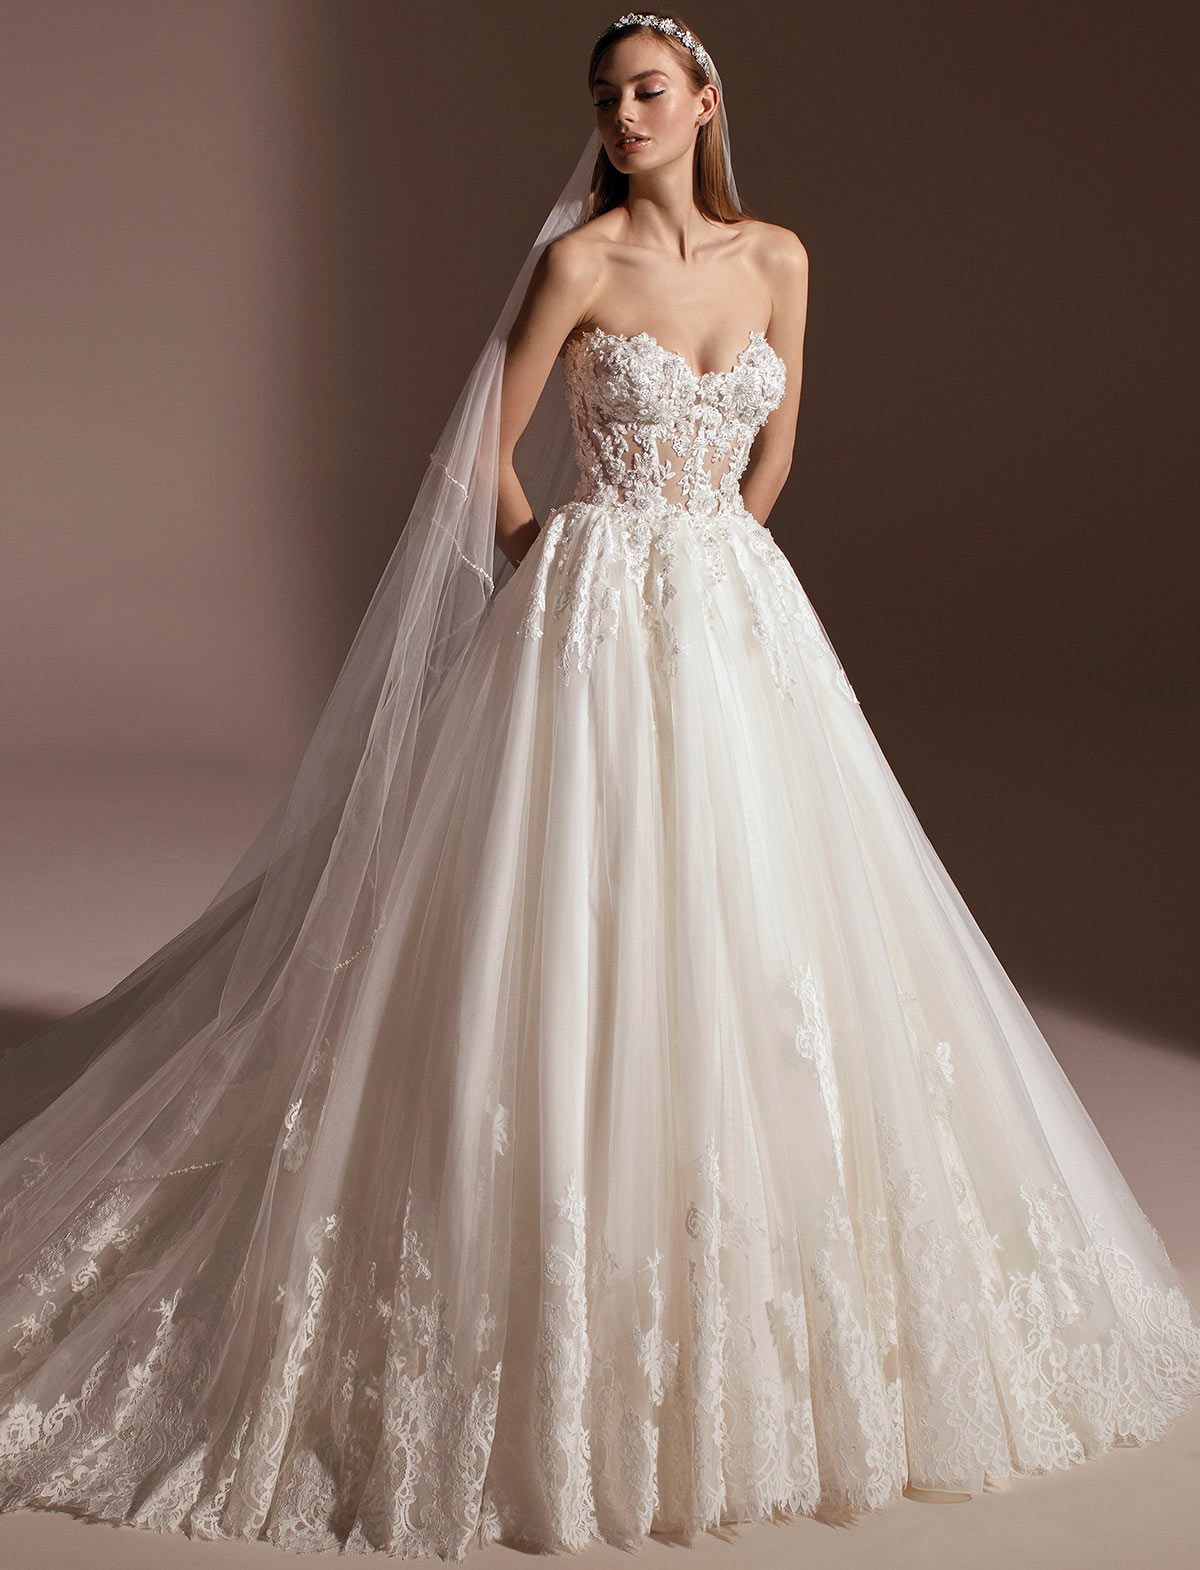 Luxurious lace wedding dress with the finest Italian mesh